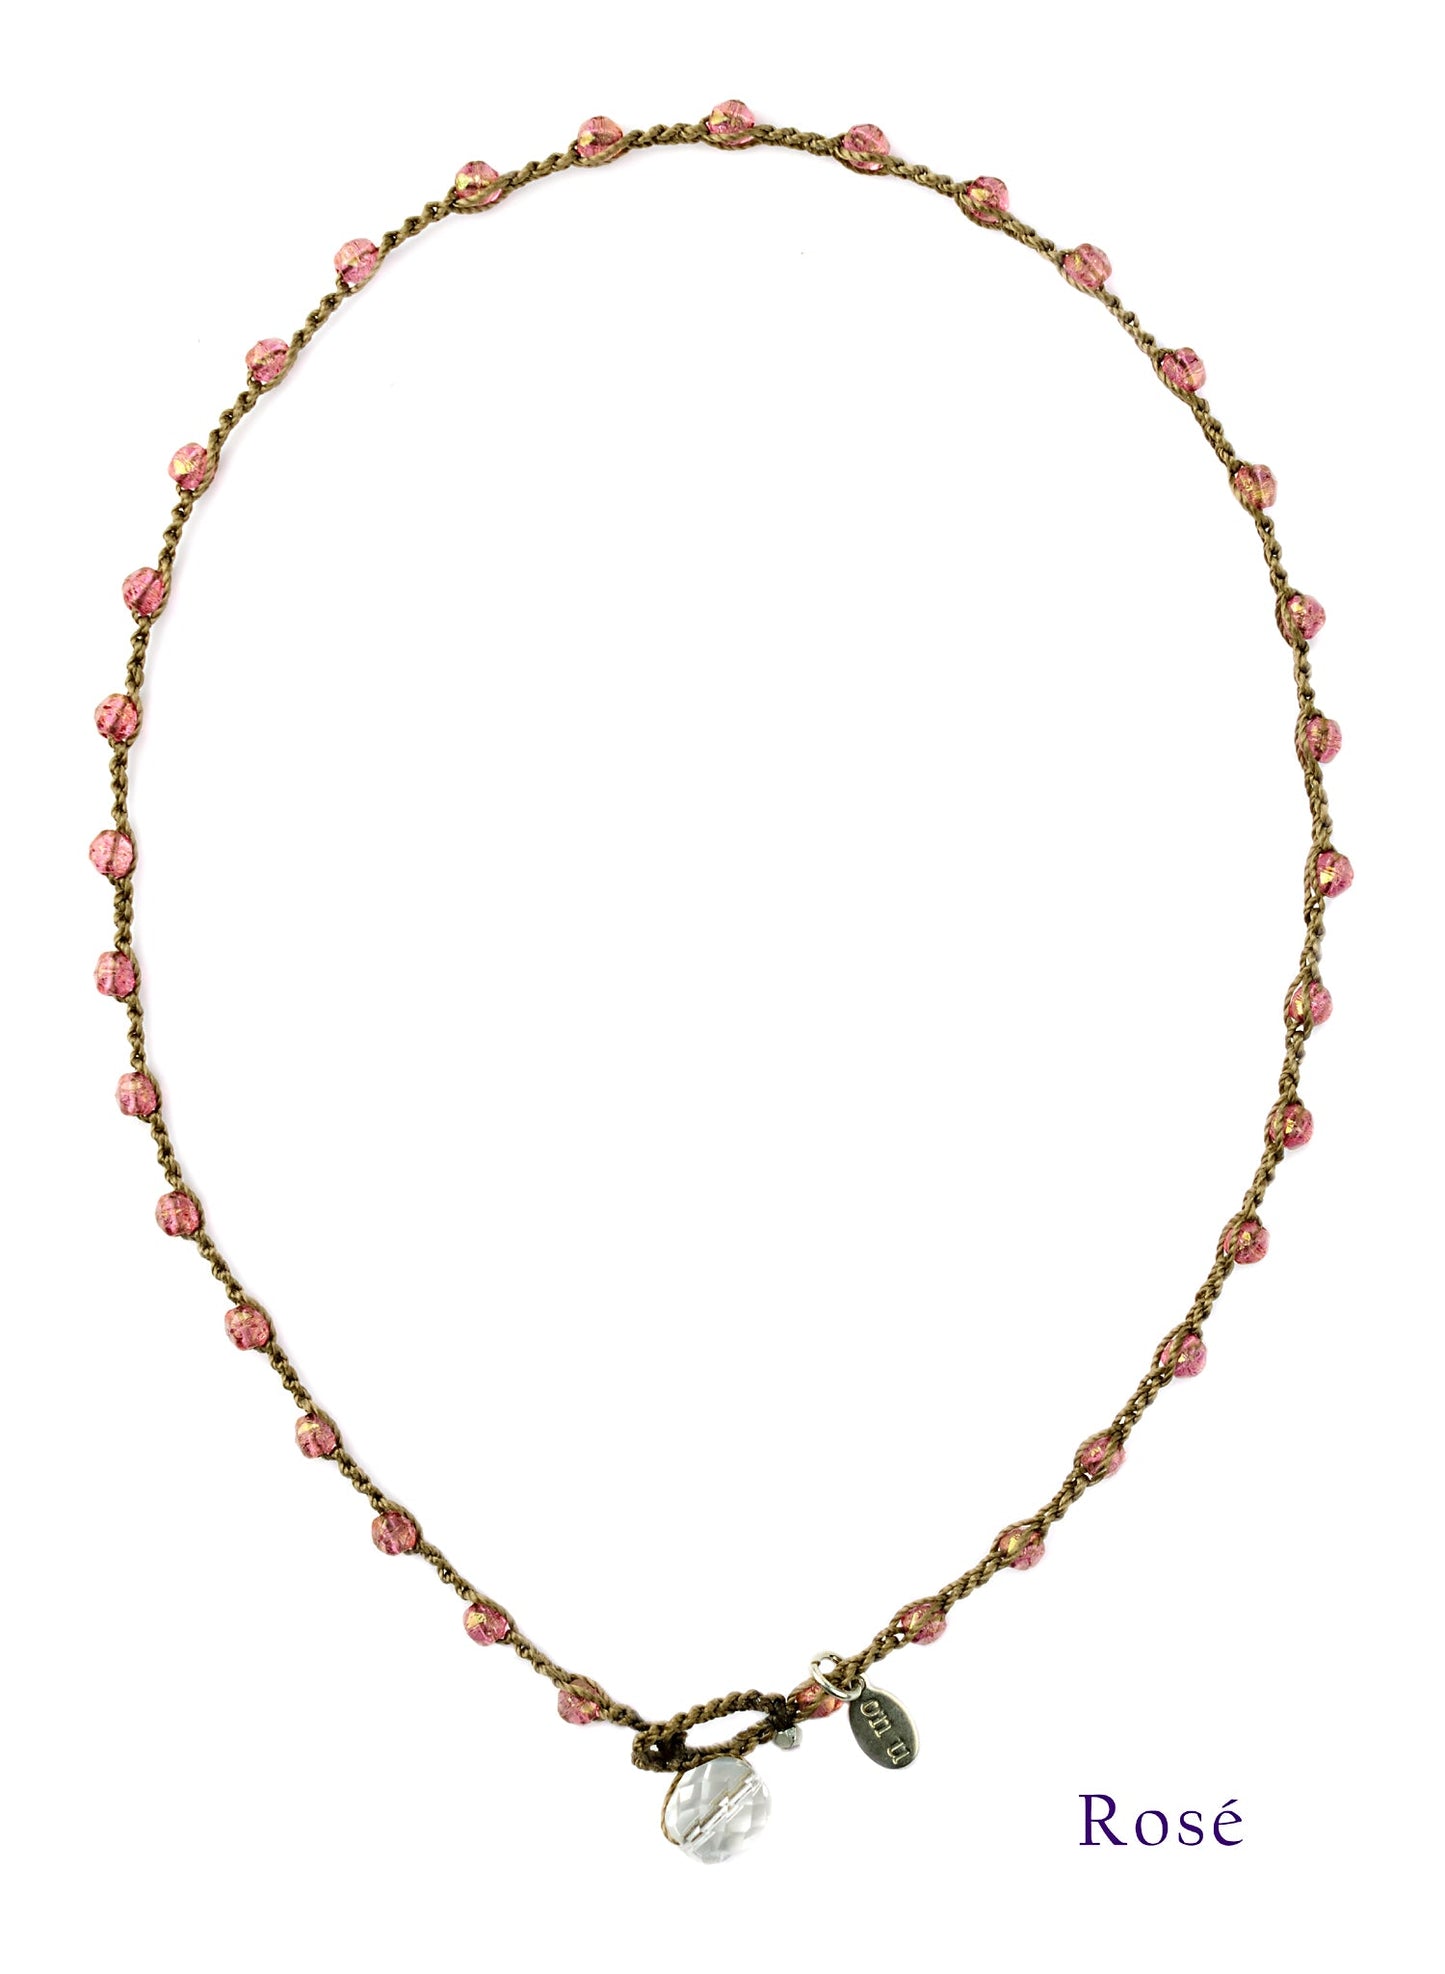 onujewelry.com - Small Bead Dot Necklace in Rose.  Designed, and created, by Donna Silvestri, On U Jewelry, Richmond, VA